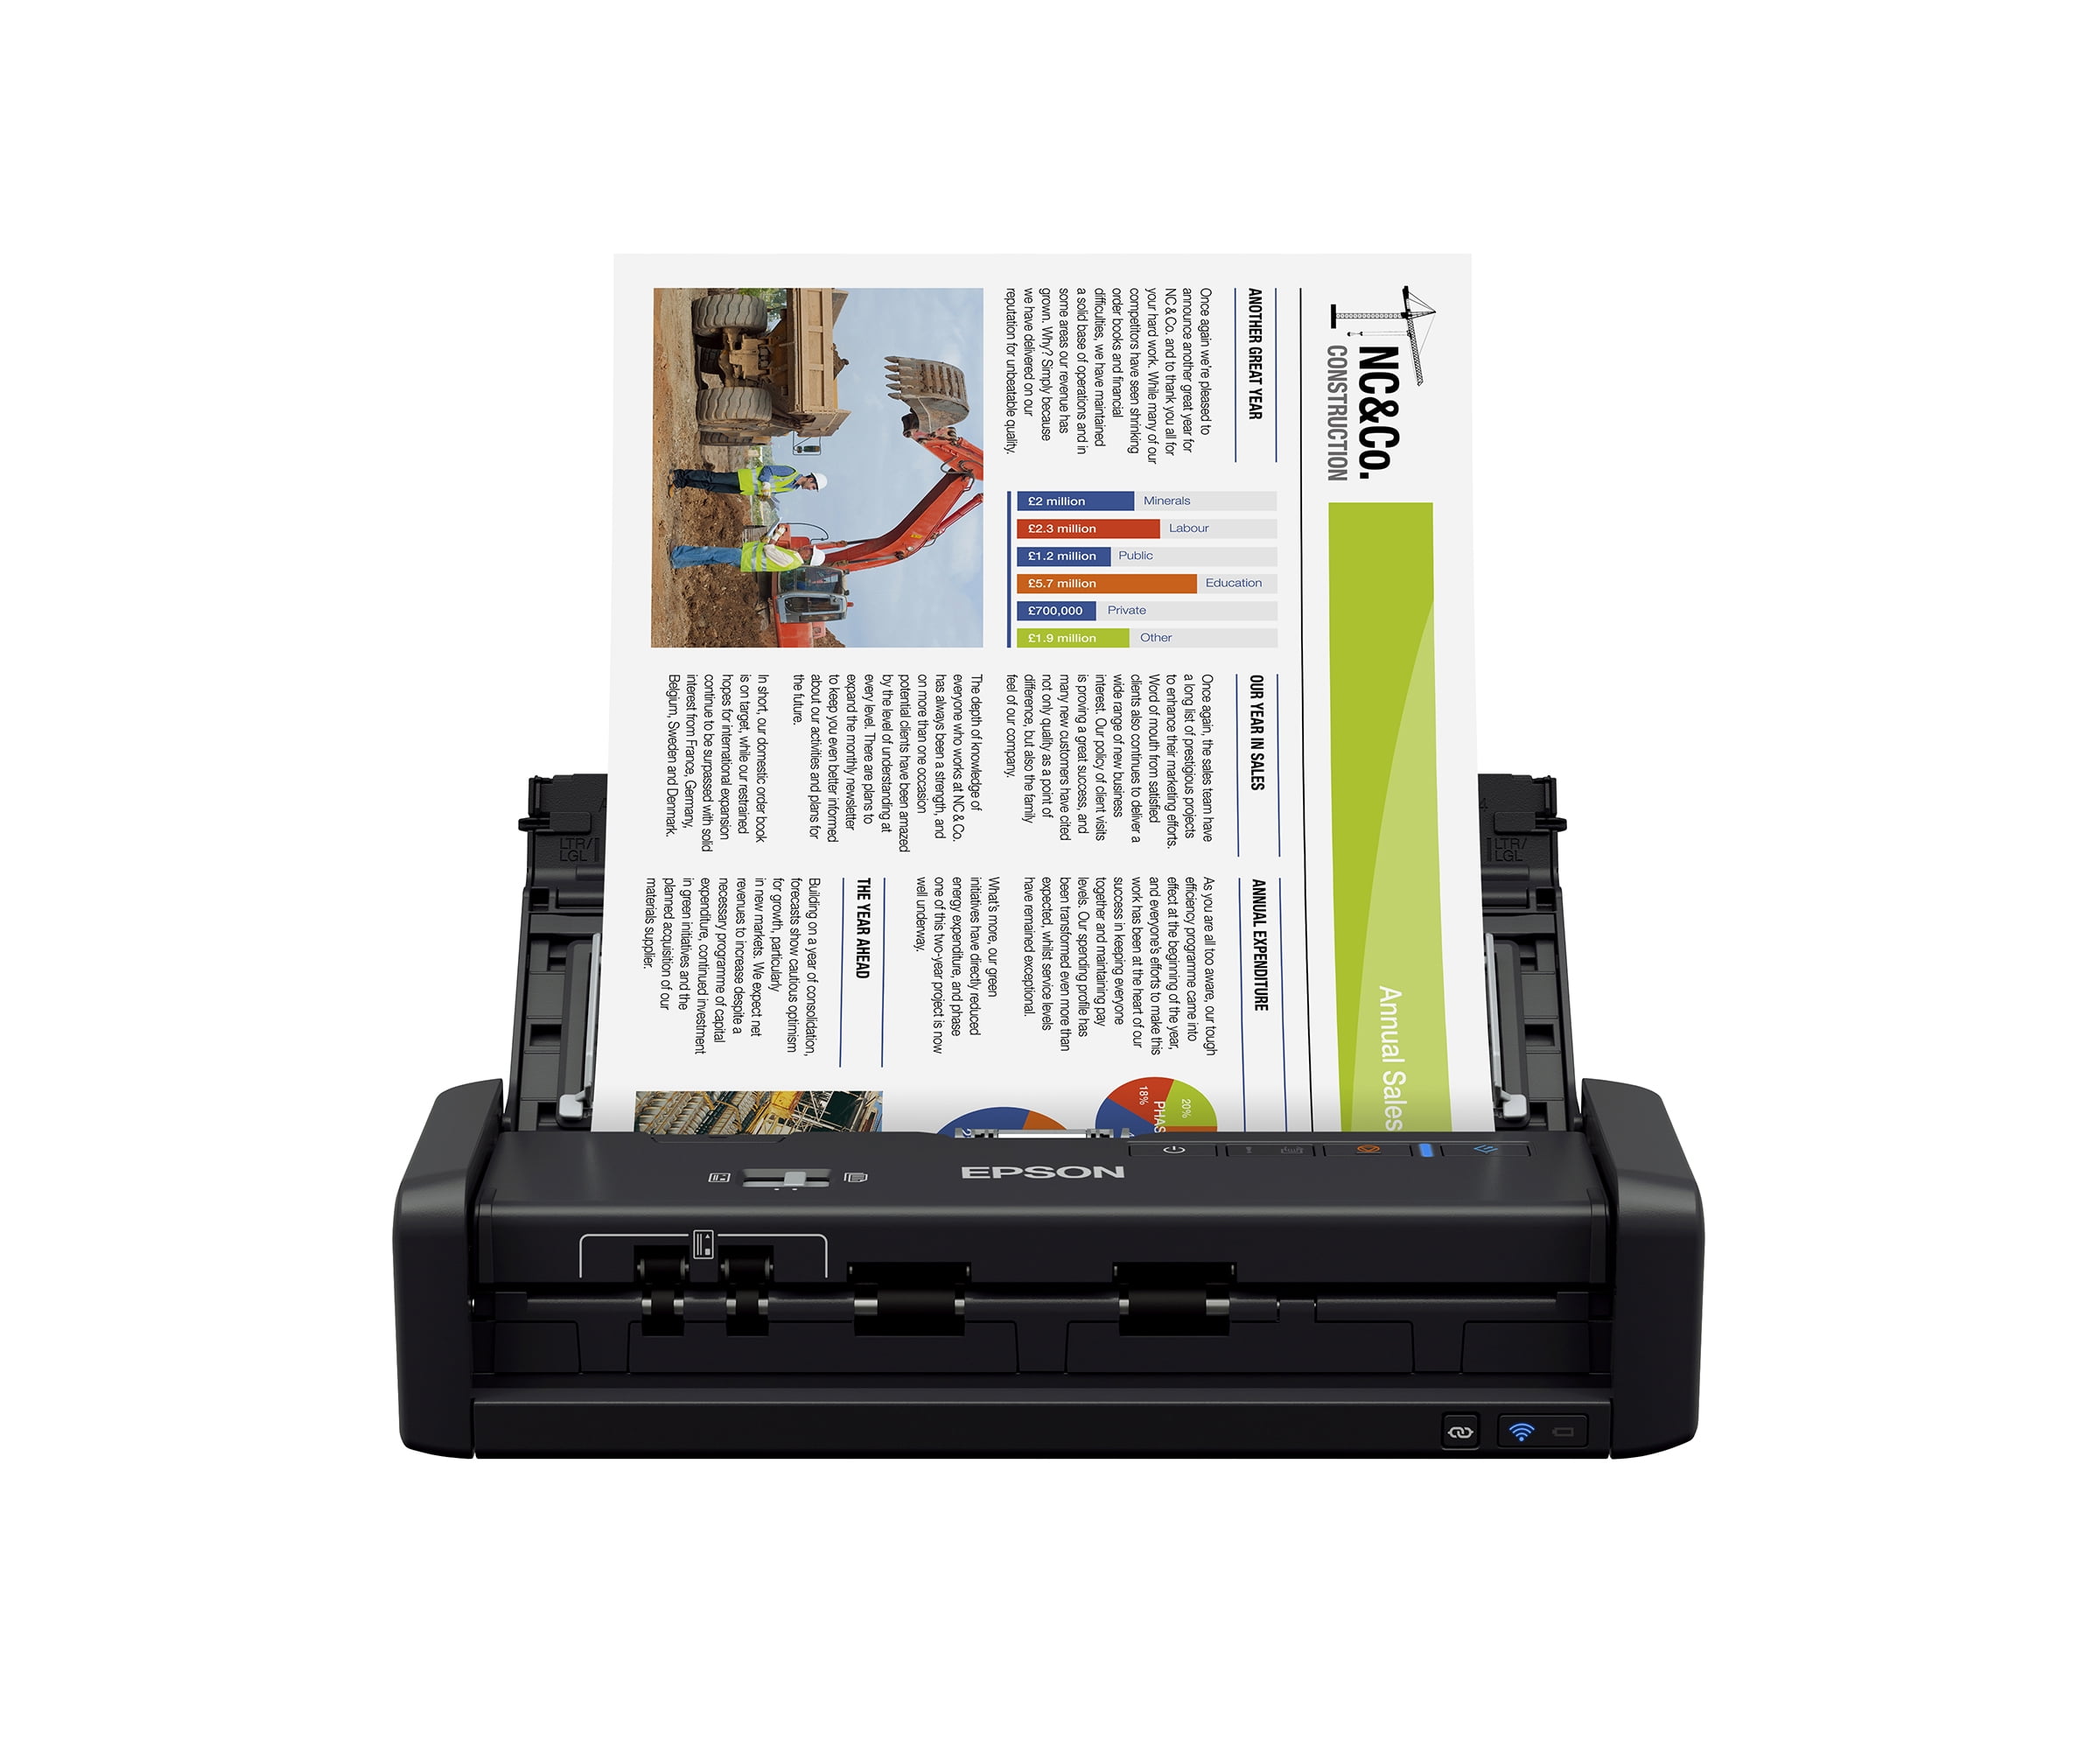 Epson WorkForce ES-300W Wireless Color Portable Document Scanner with ADF for PC and Mac, Sheet-fed and Scanning -